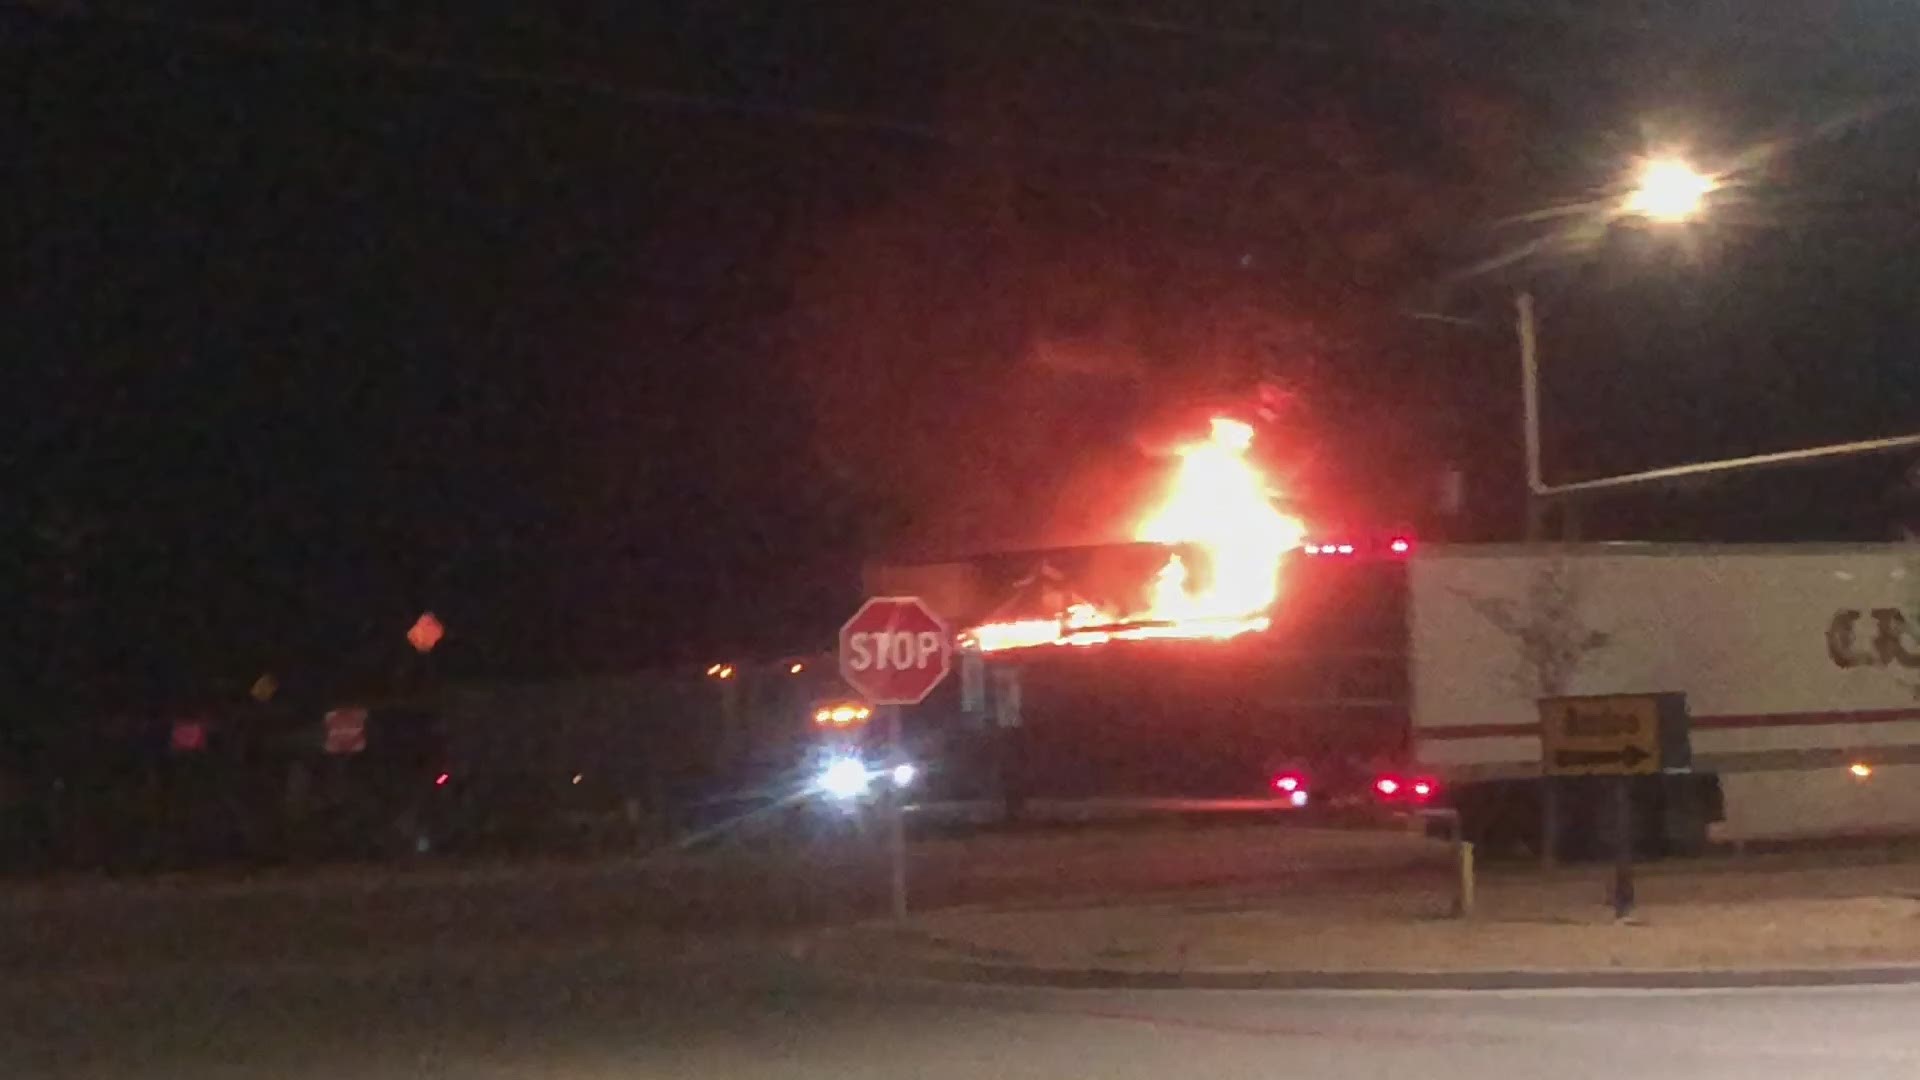 A fiery crash with two 18-wheelers shut down I-35 in Denton early Tuesday. No major injuries were reported. Authorities expected it to be closed for several hours.